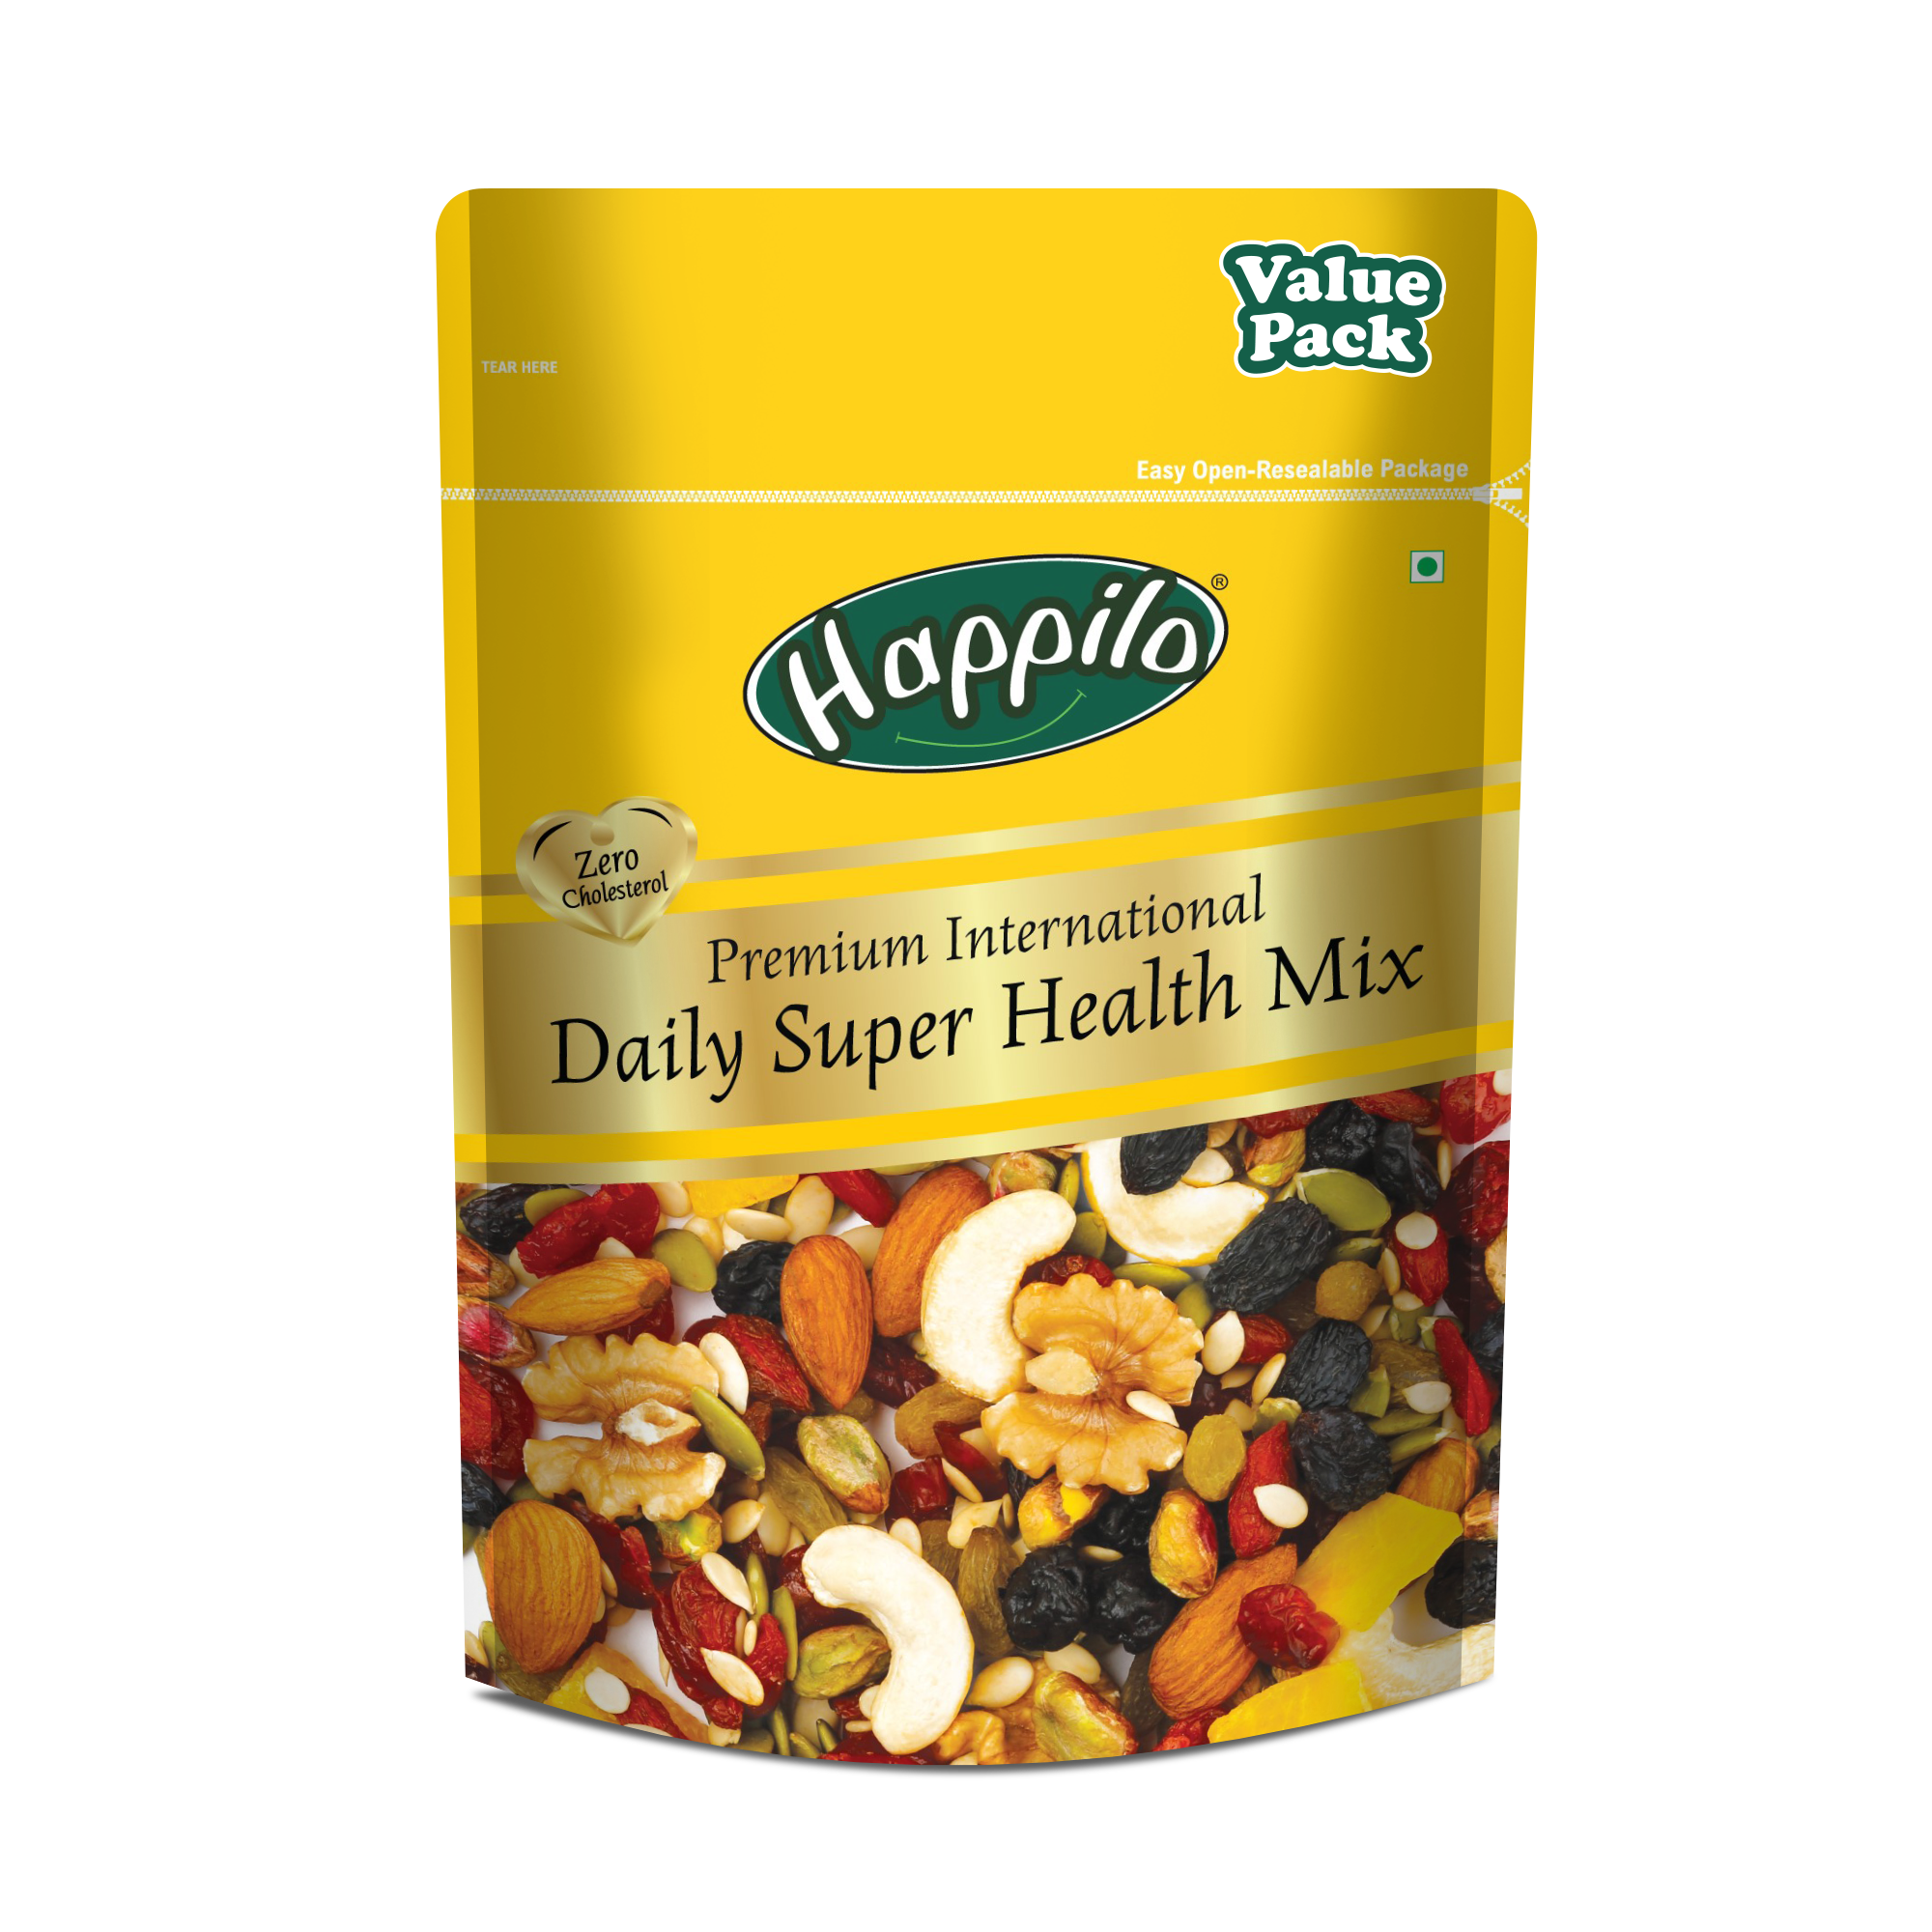 Daily Super Health Mix Snack